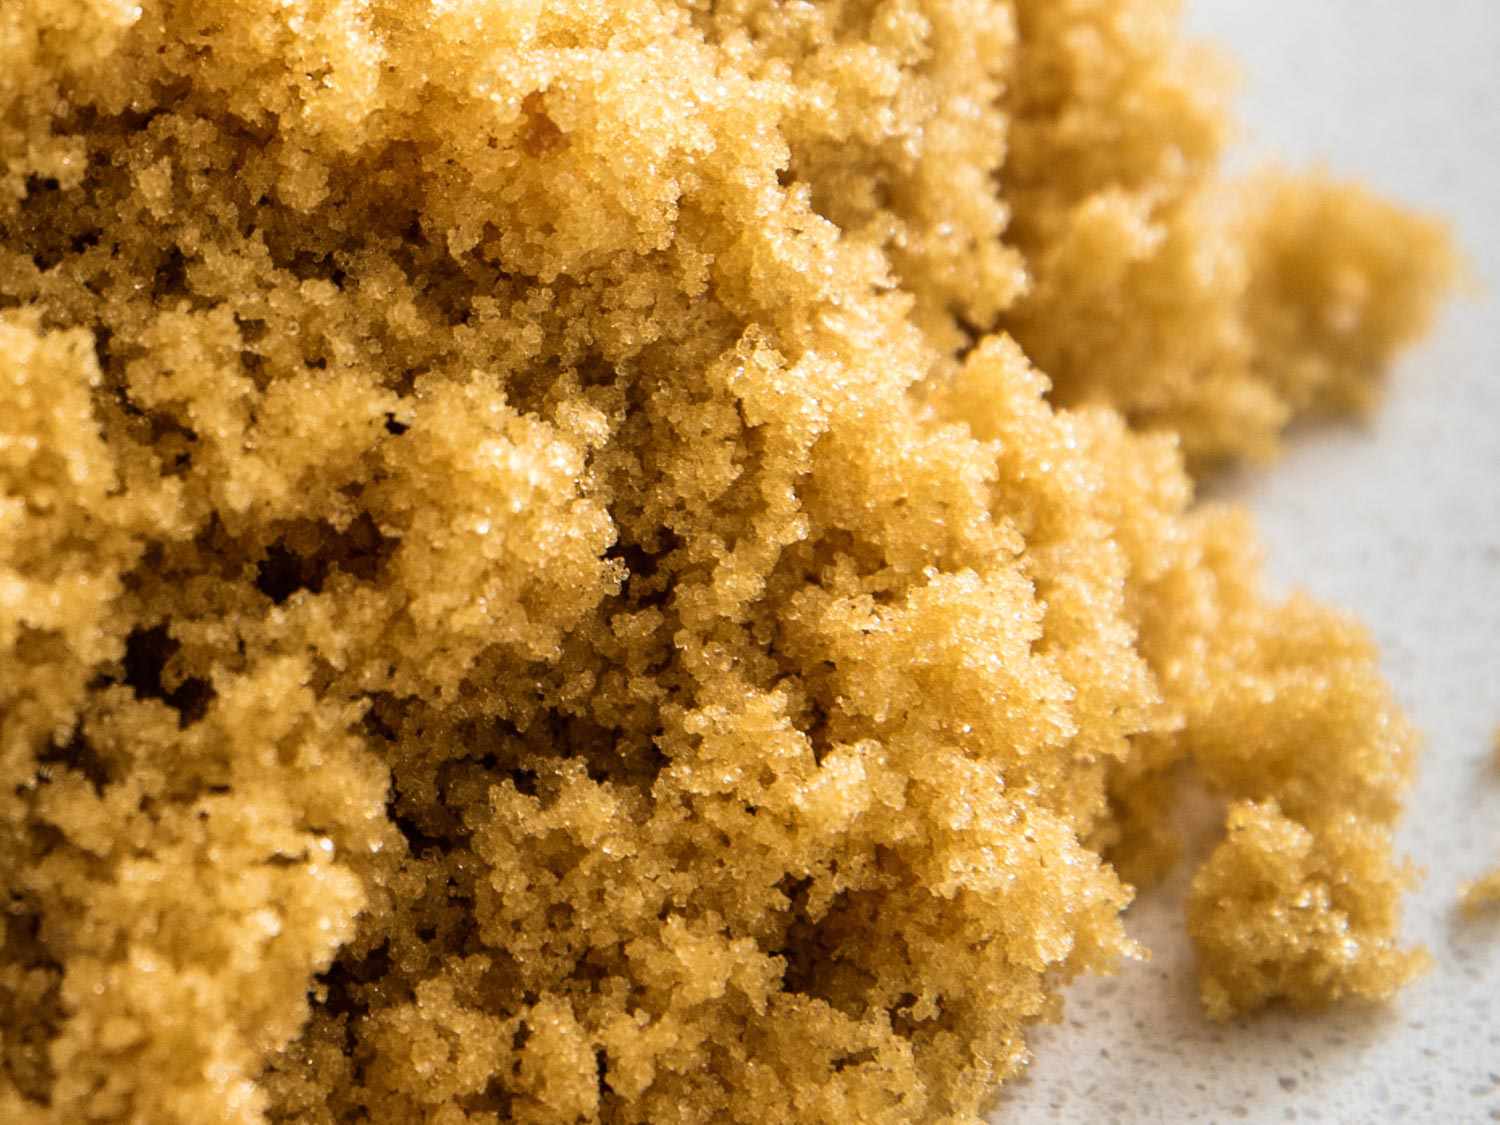 Closeup of American brown sugar made from sucrose and molasses